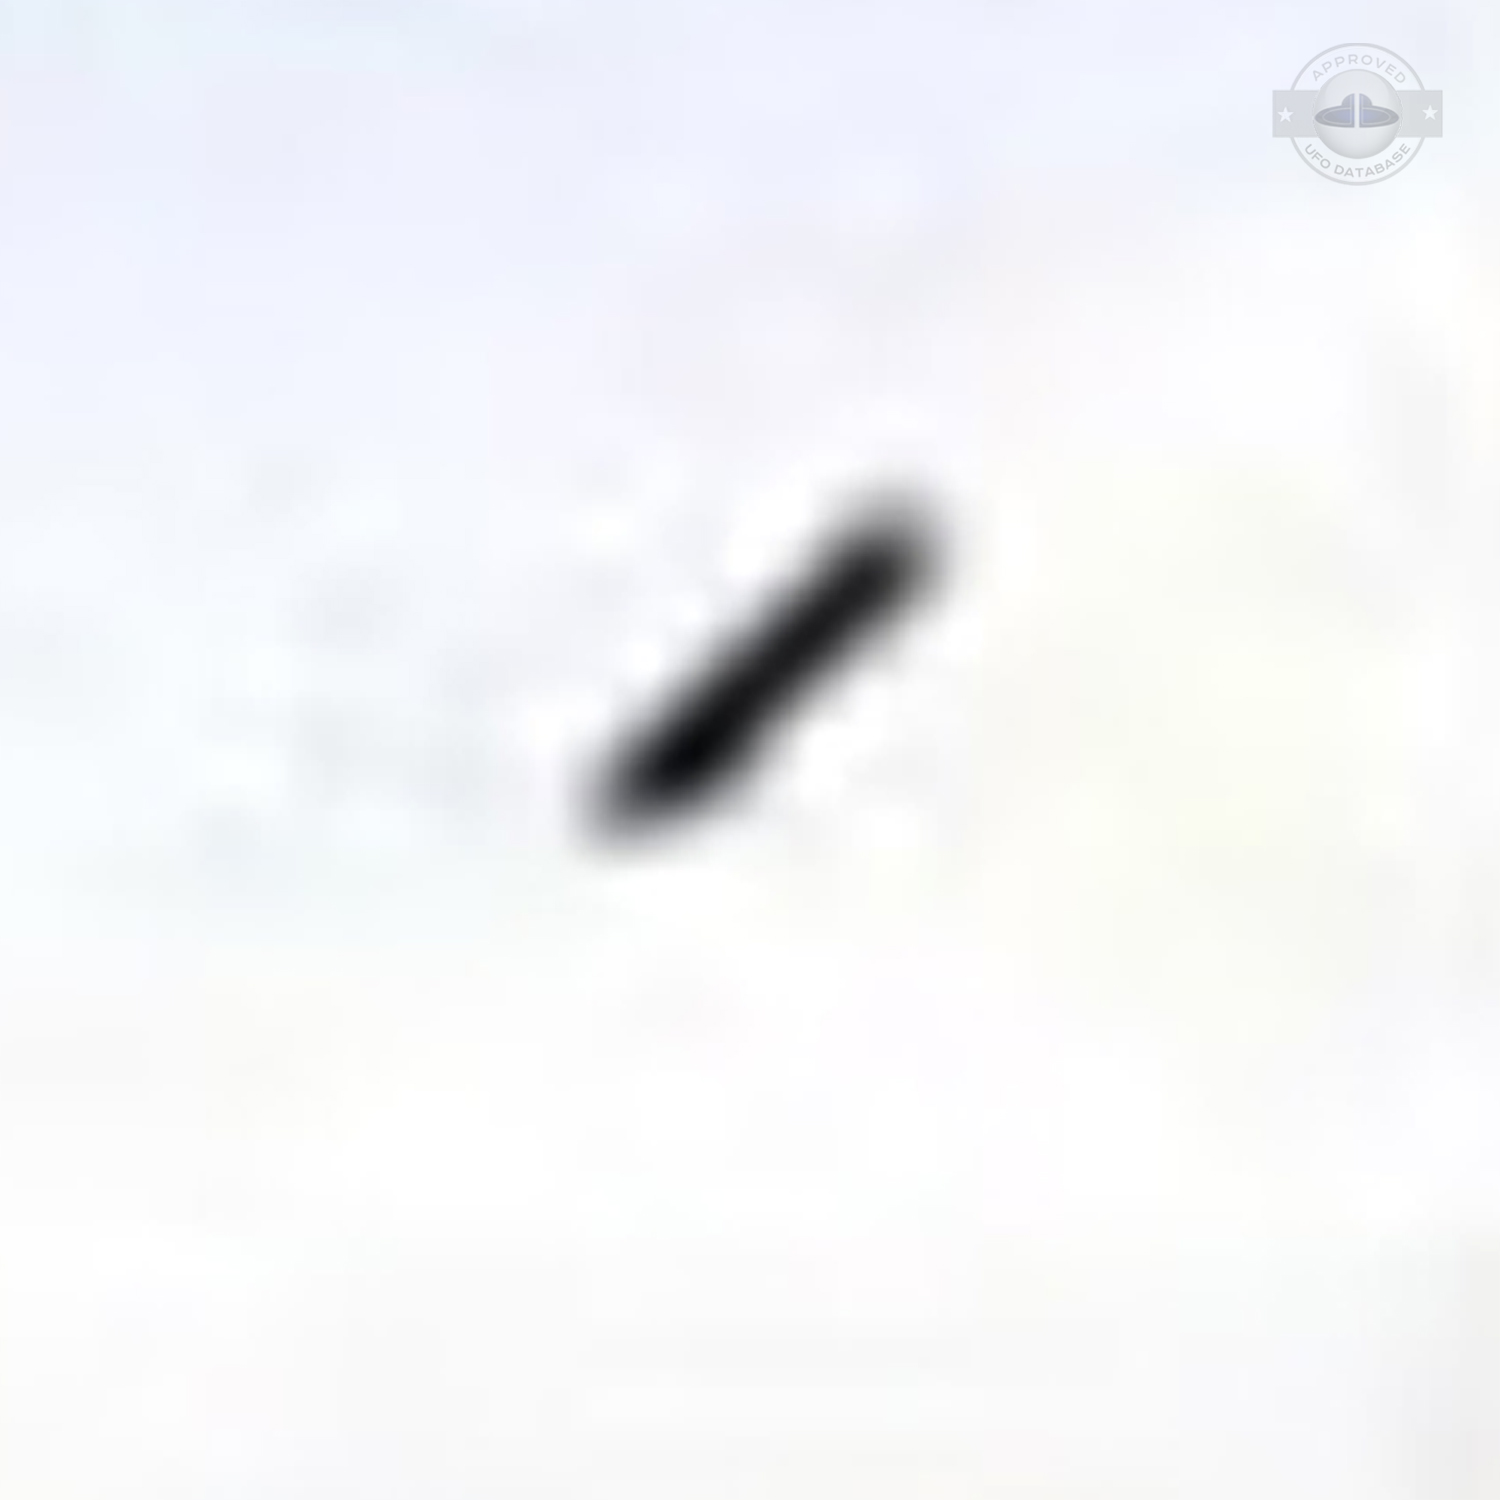 UFO Picture taken while Saddam Hussein statue is falling | Baghdad UFO Picture #183-5